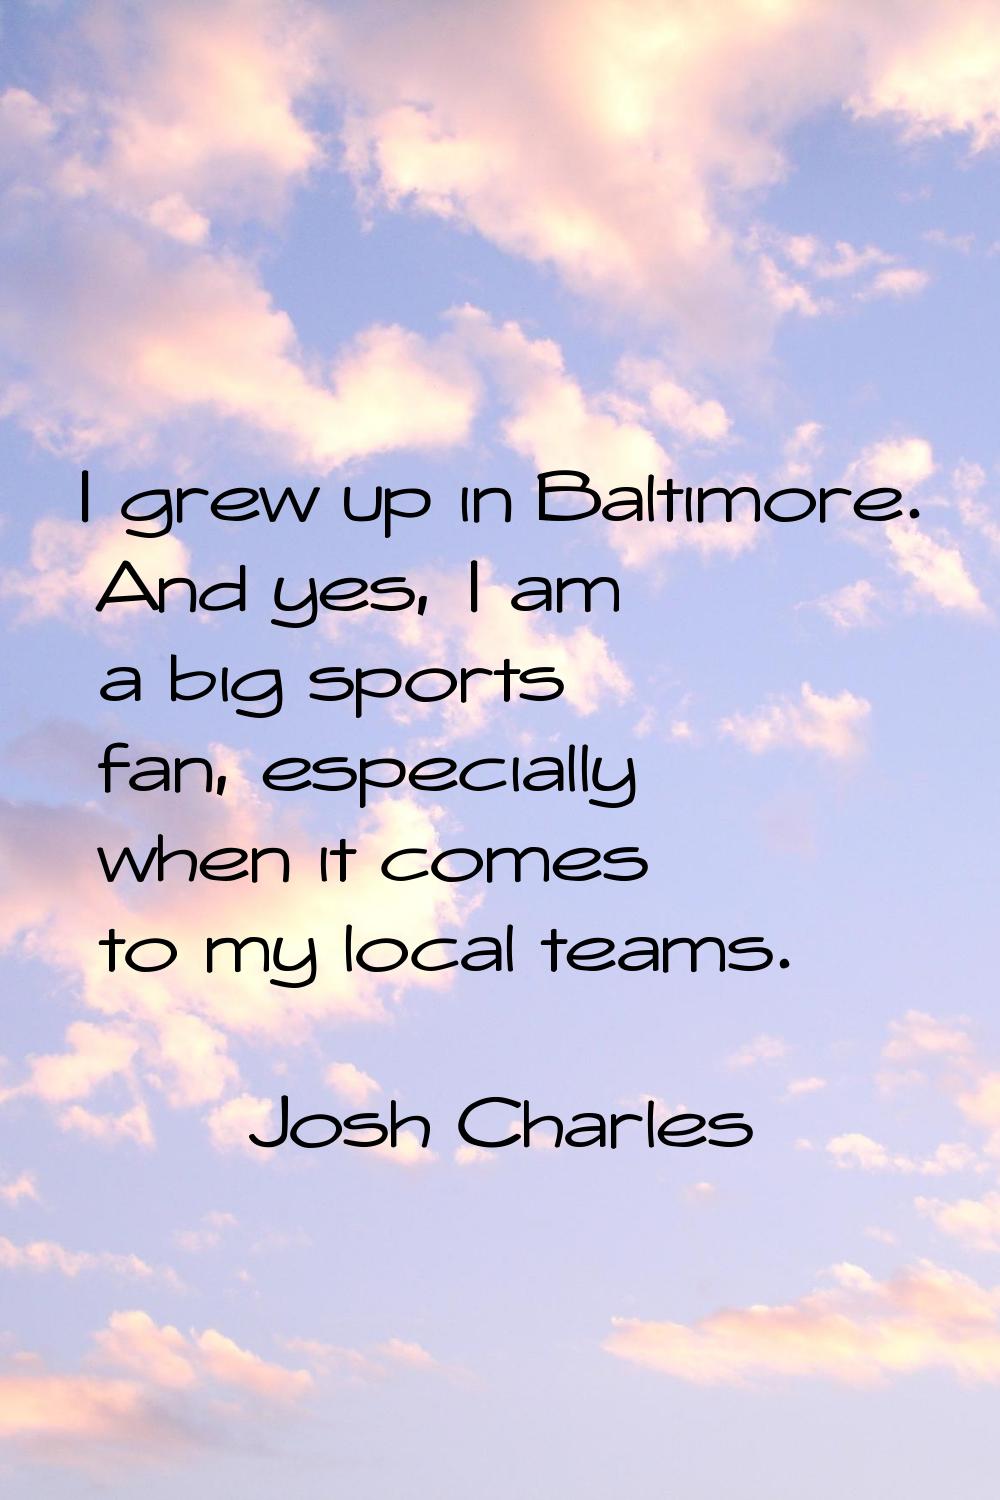 I grew up in Baltimore. And yes, I am a big sports fan, especially when it comes to my local teams.